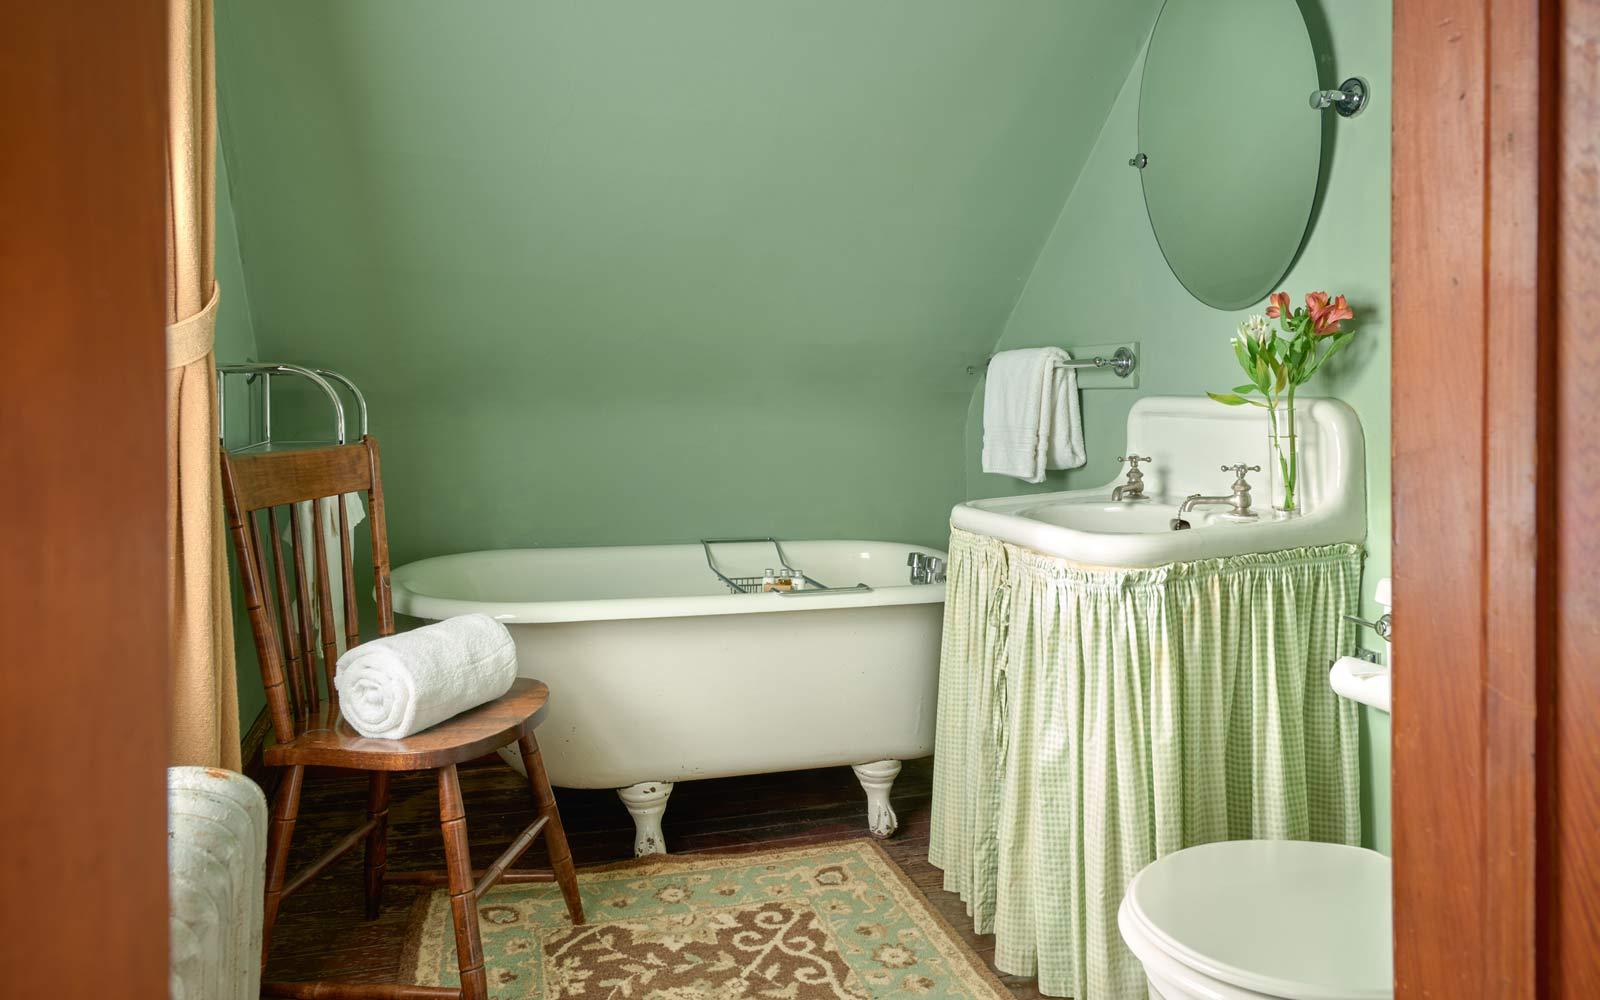 Private Bathroom with Clawfoot Tub